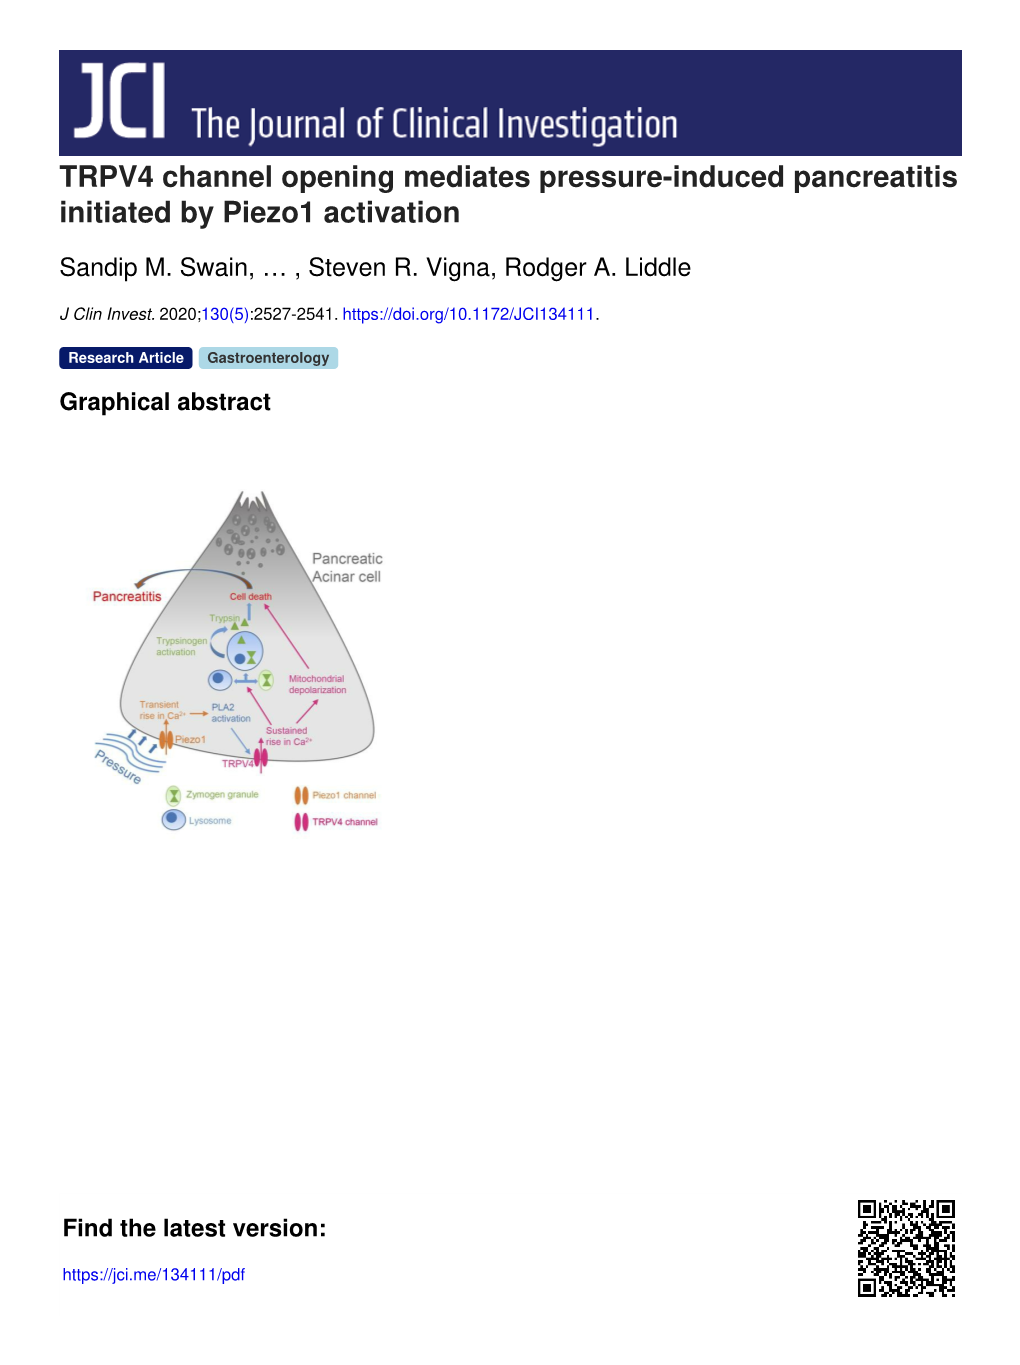 TRPV4 Channel Opening Mediates Pressure-Induced Pancreatitis Initiated by Piezo1 Activation